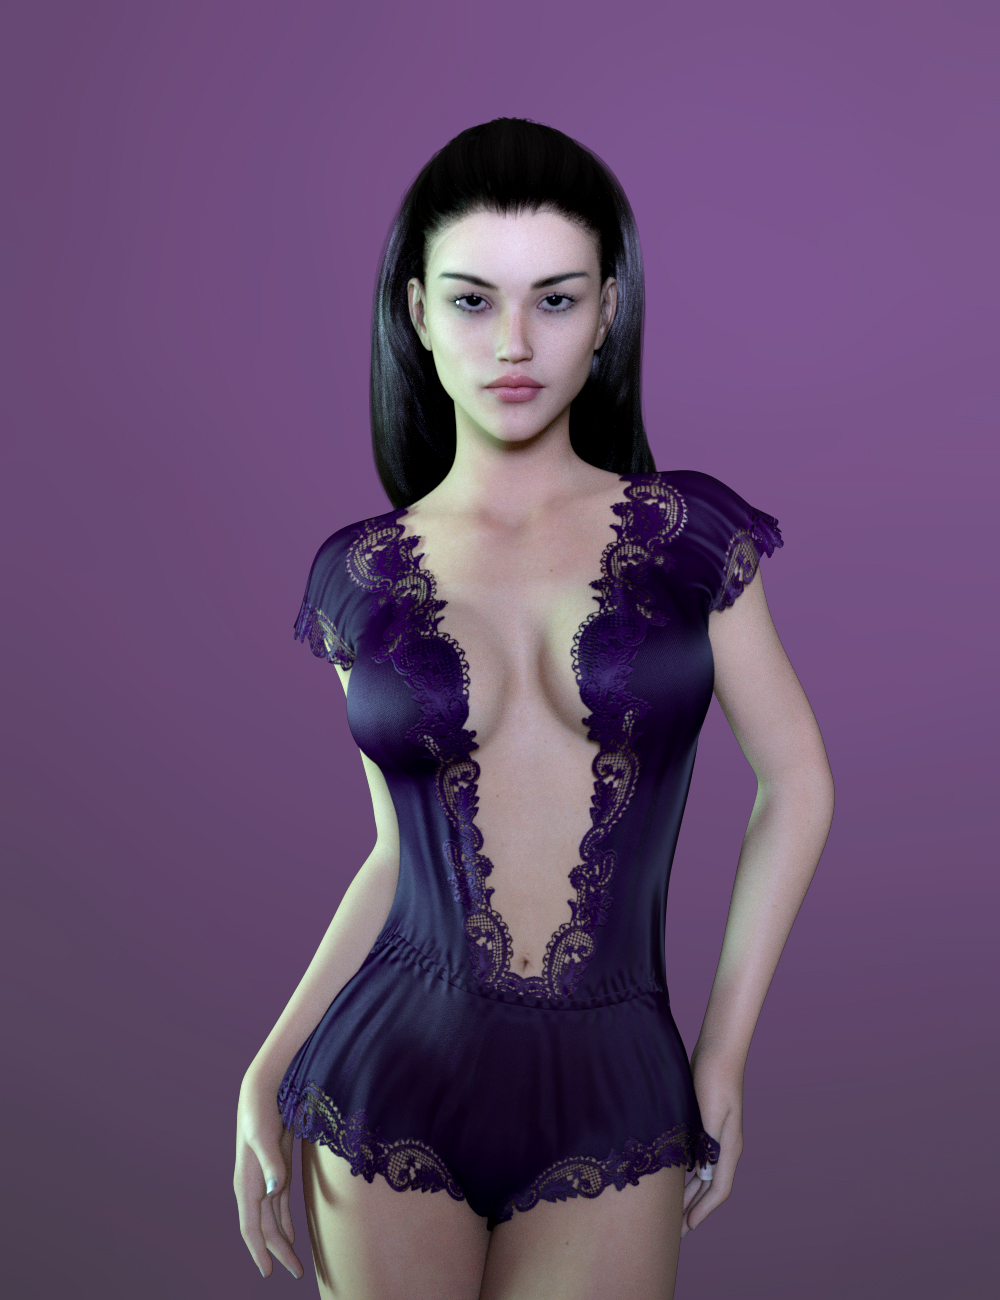 7 Deadly Sins: Vanity and Envy by: SR3Lyoness, 3D Models by Daz 3D